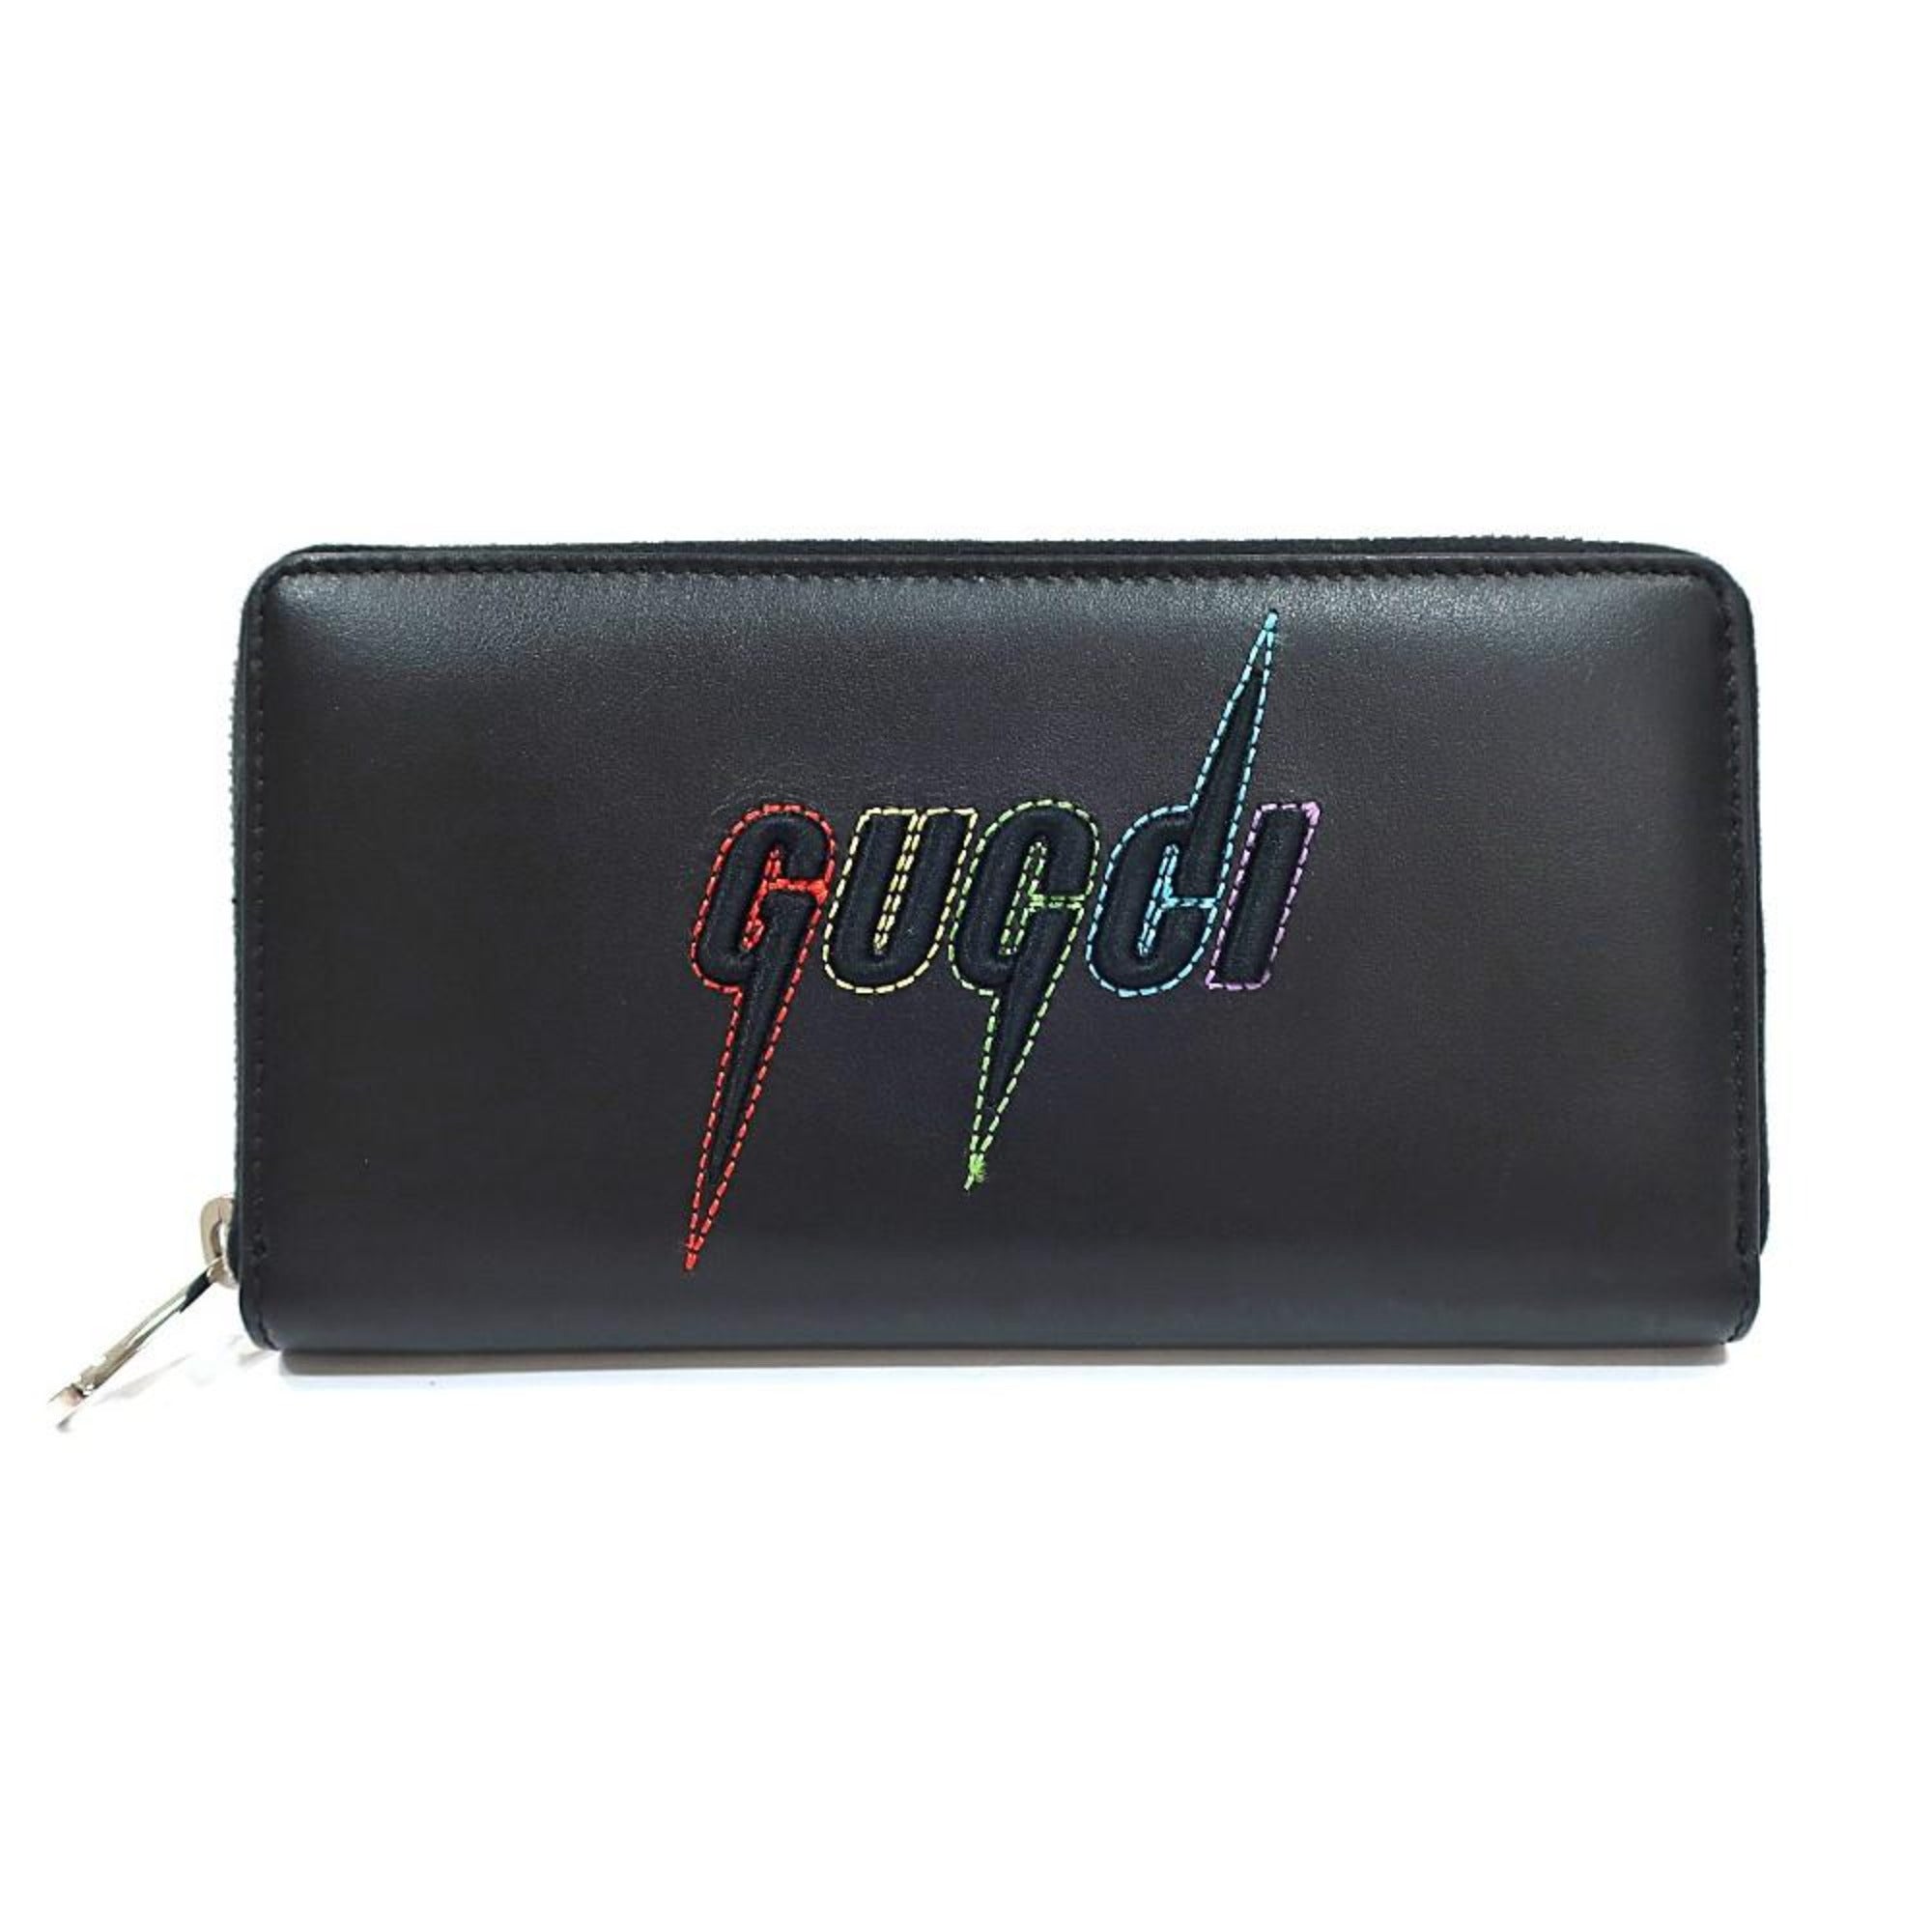 Gucci Black Leather Rainbow Lightning Logo Continental Wallet 597677 at_Queen_Bee_of_Beverly_Hills